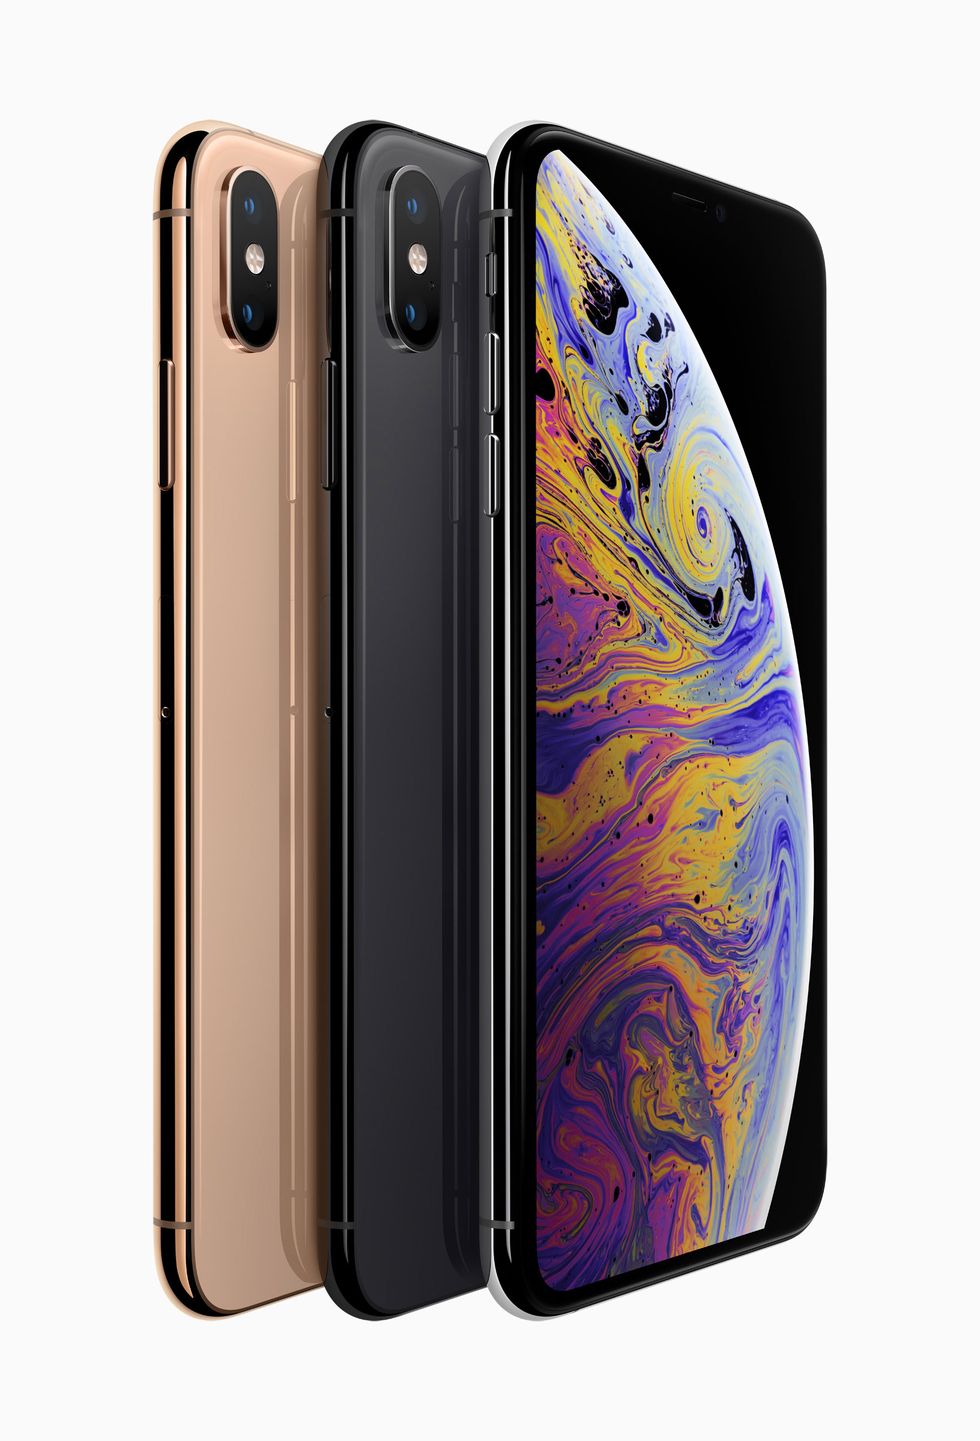 iPhone XS and Max deals Where can you get the best prices on Apple's